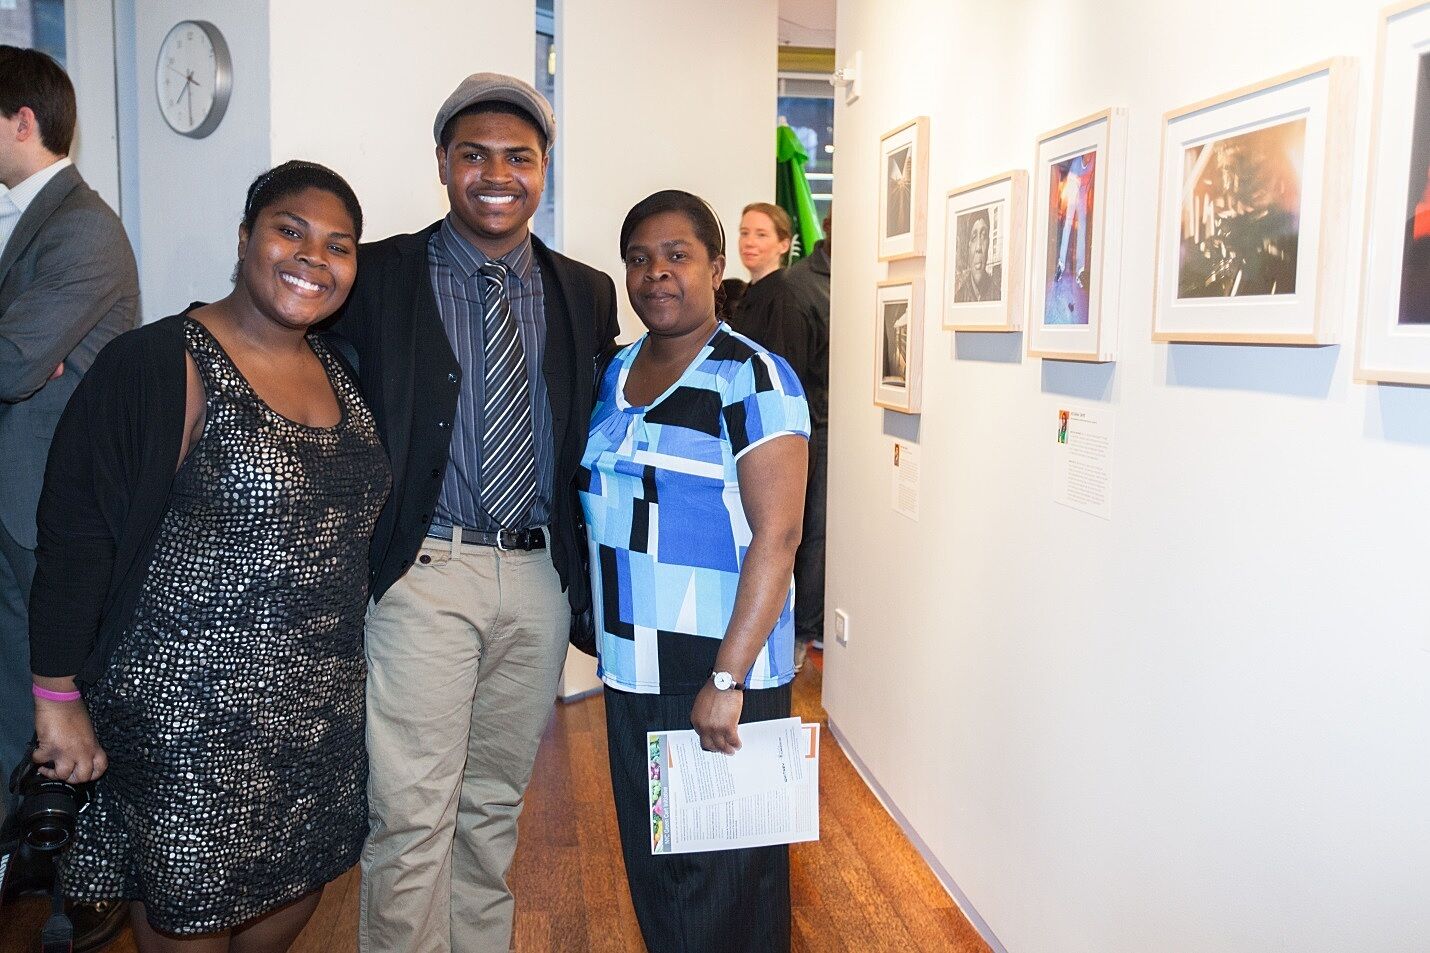 Participant and family pose in gallery.